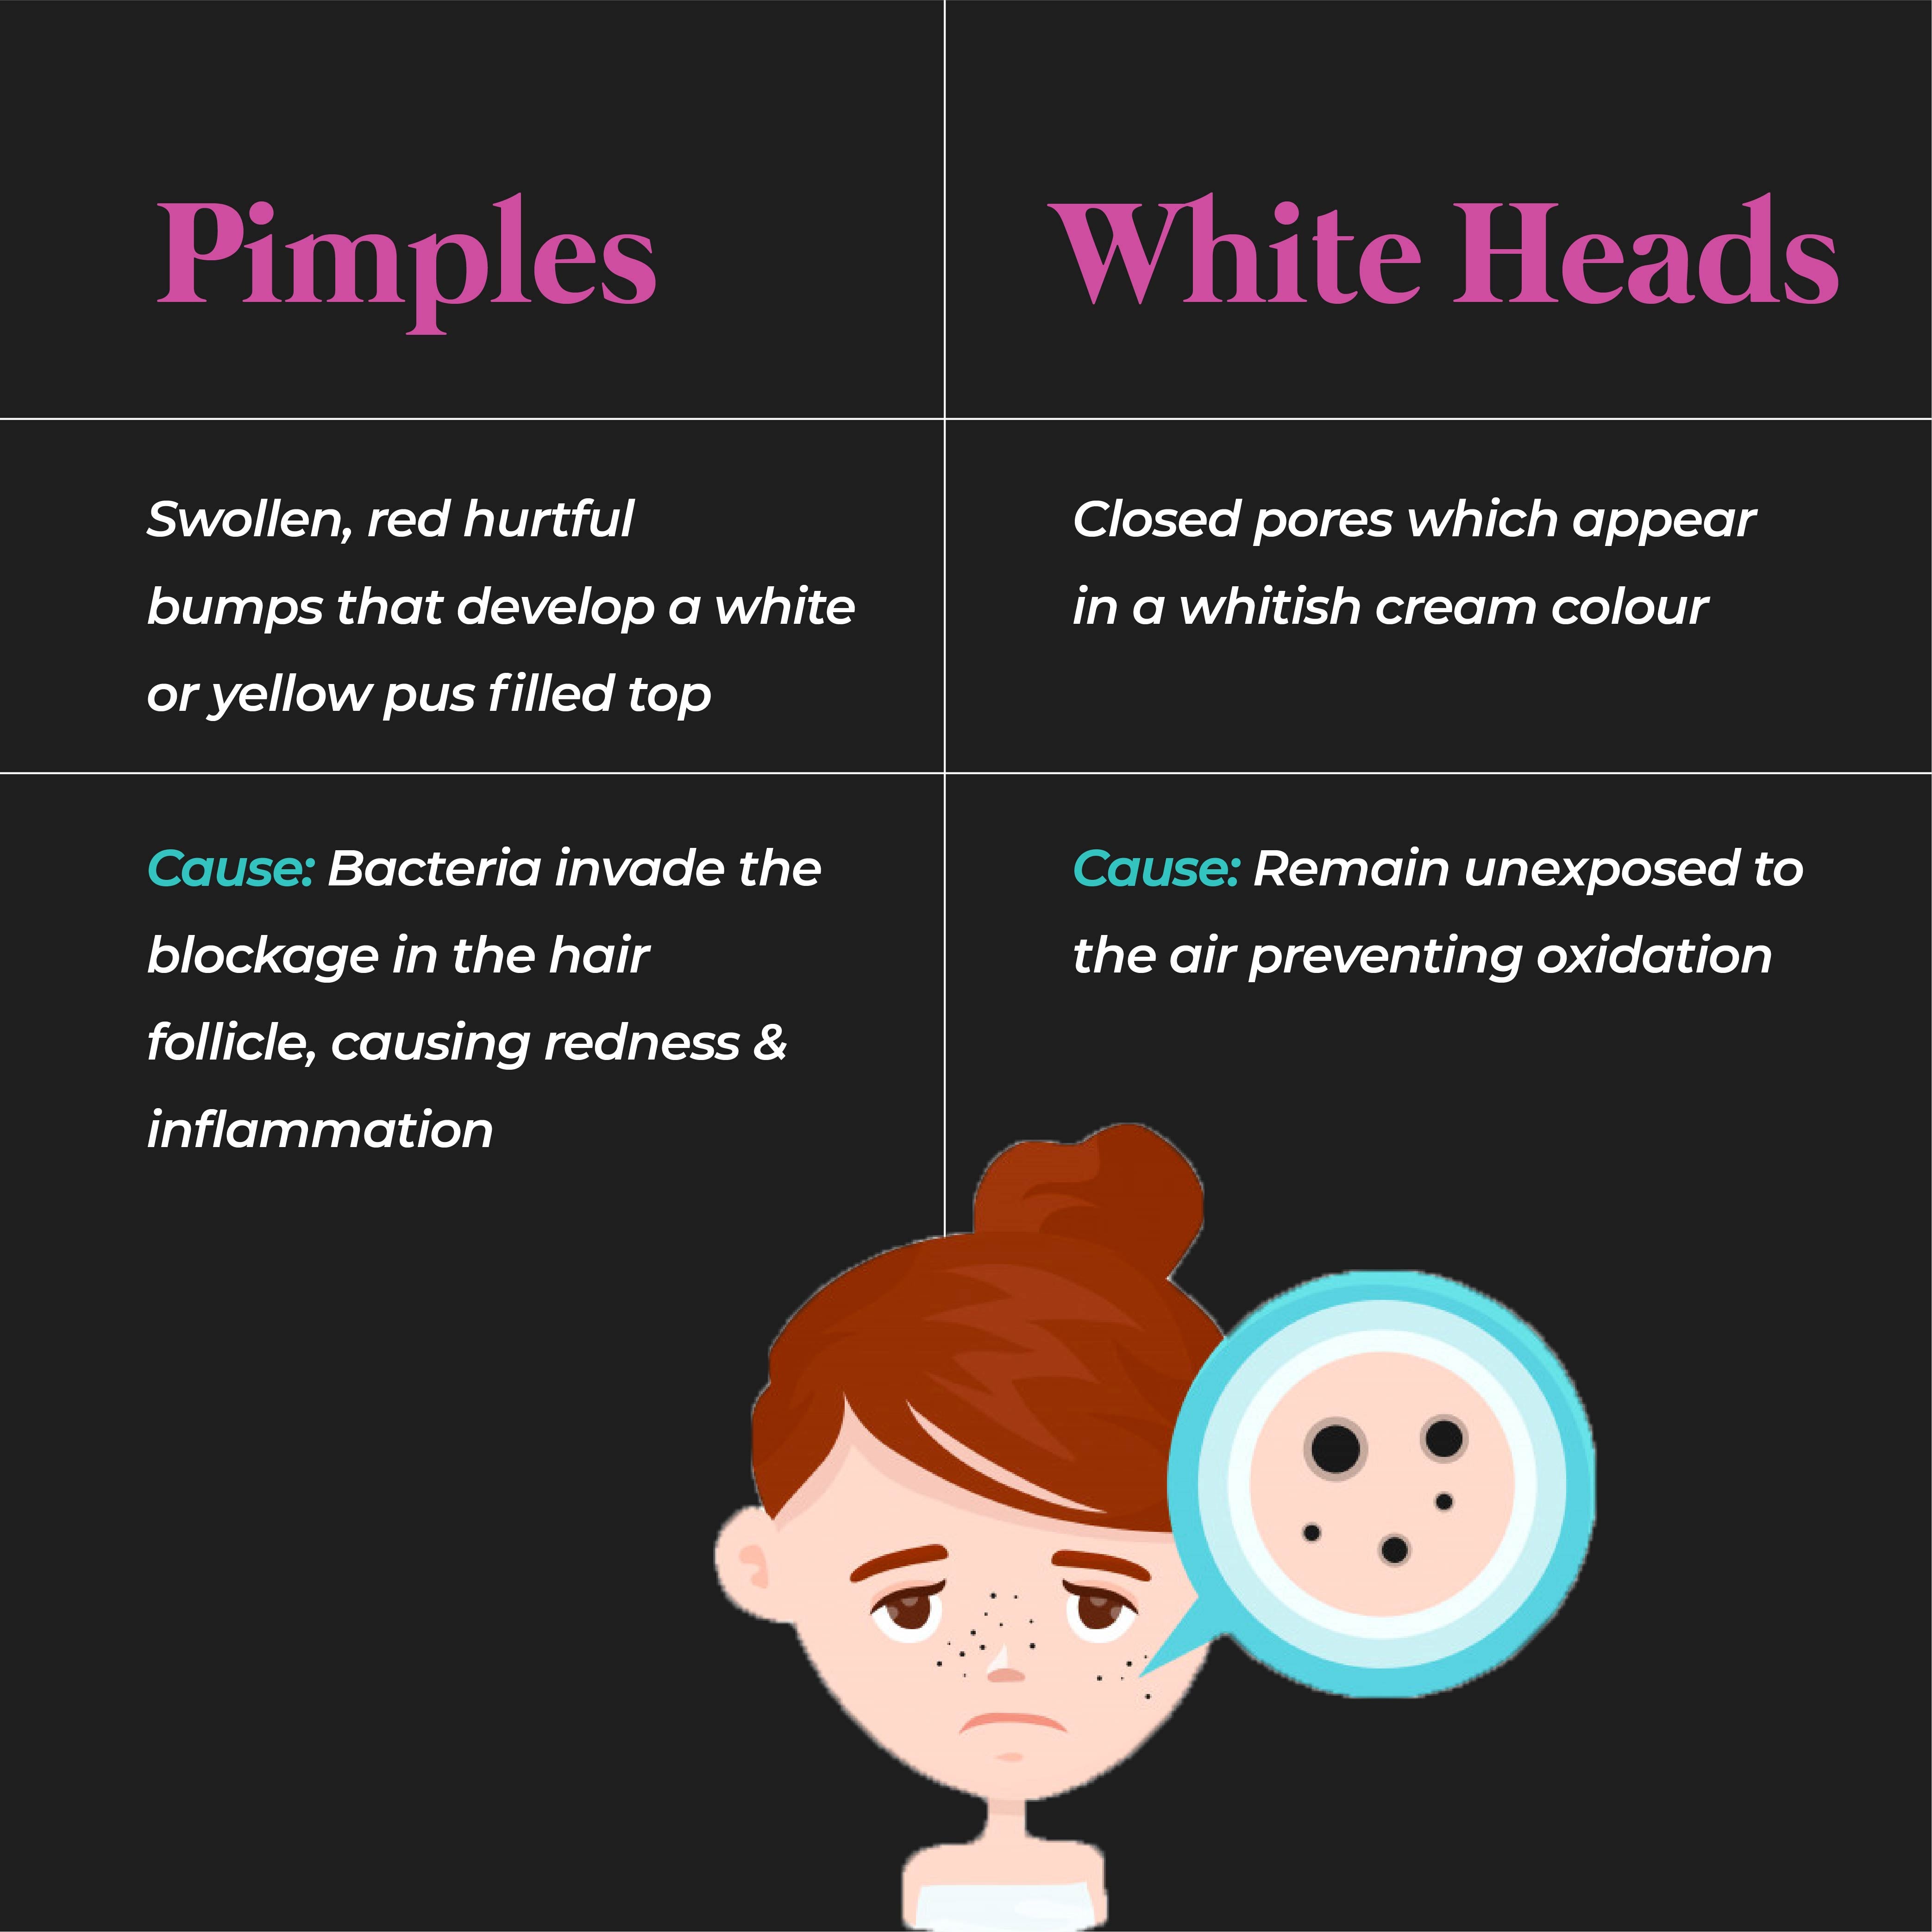 This is an image of the difference between pimples and whiteheads